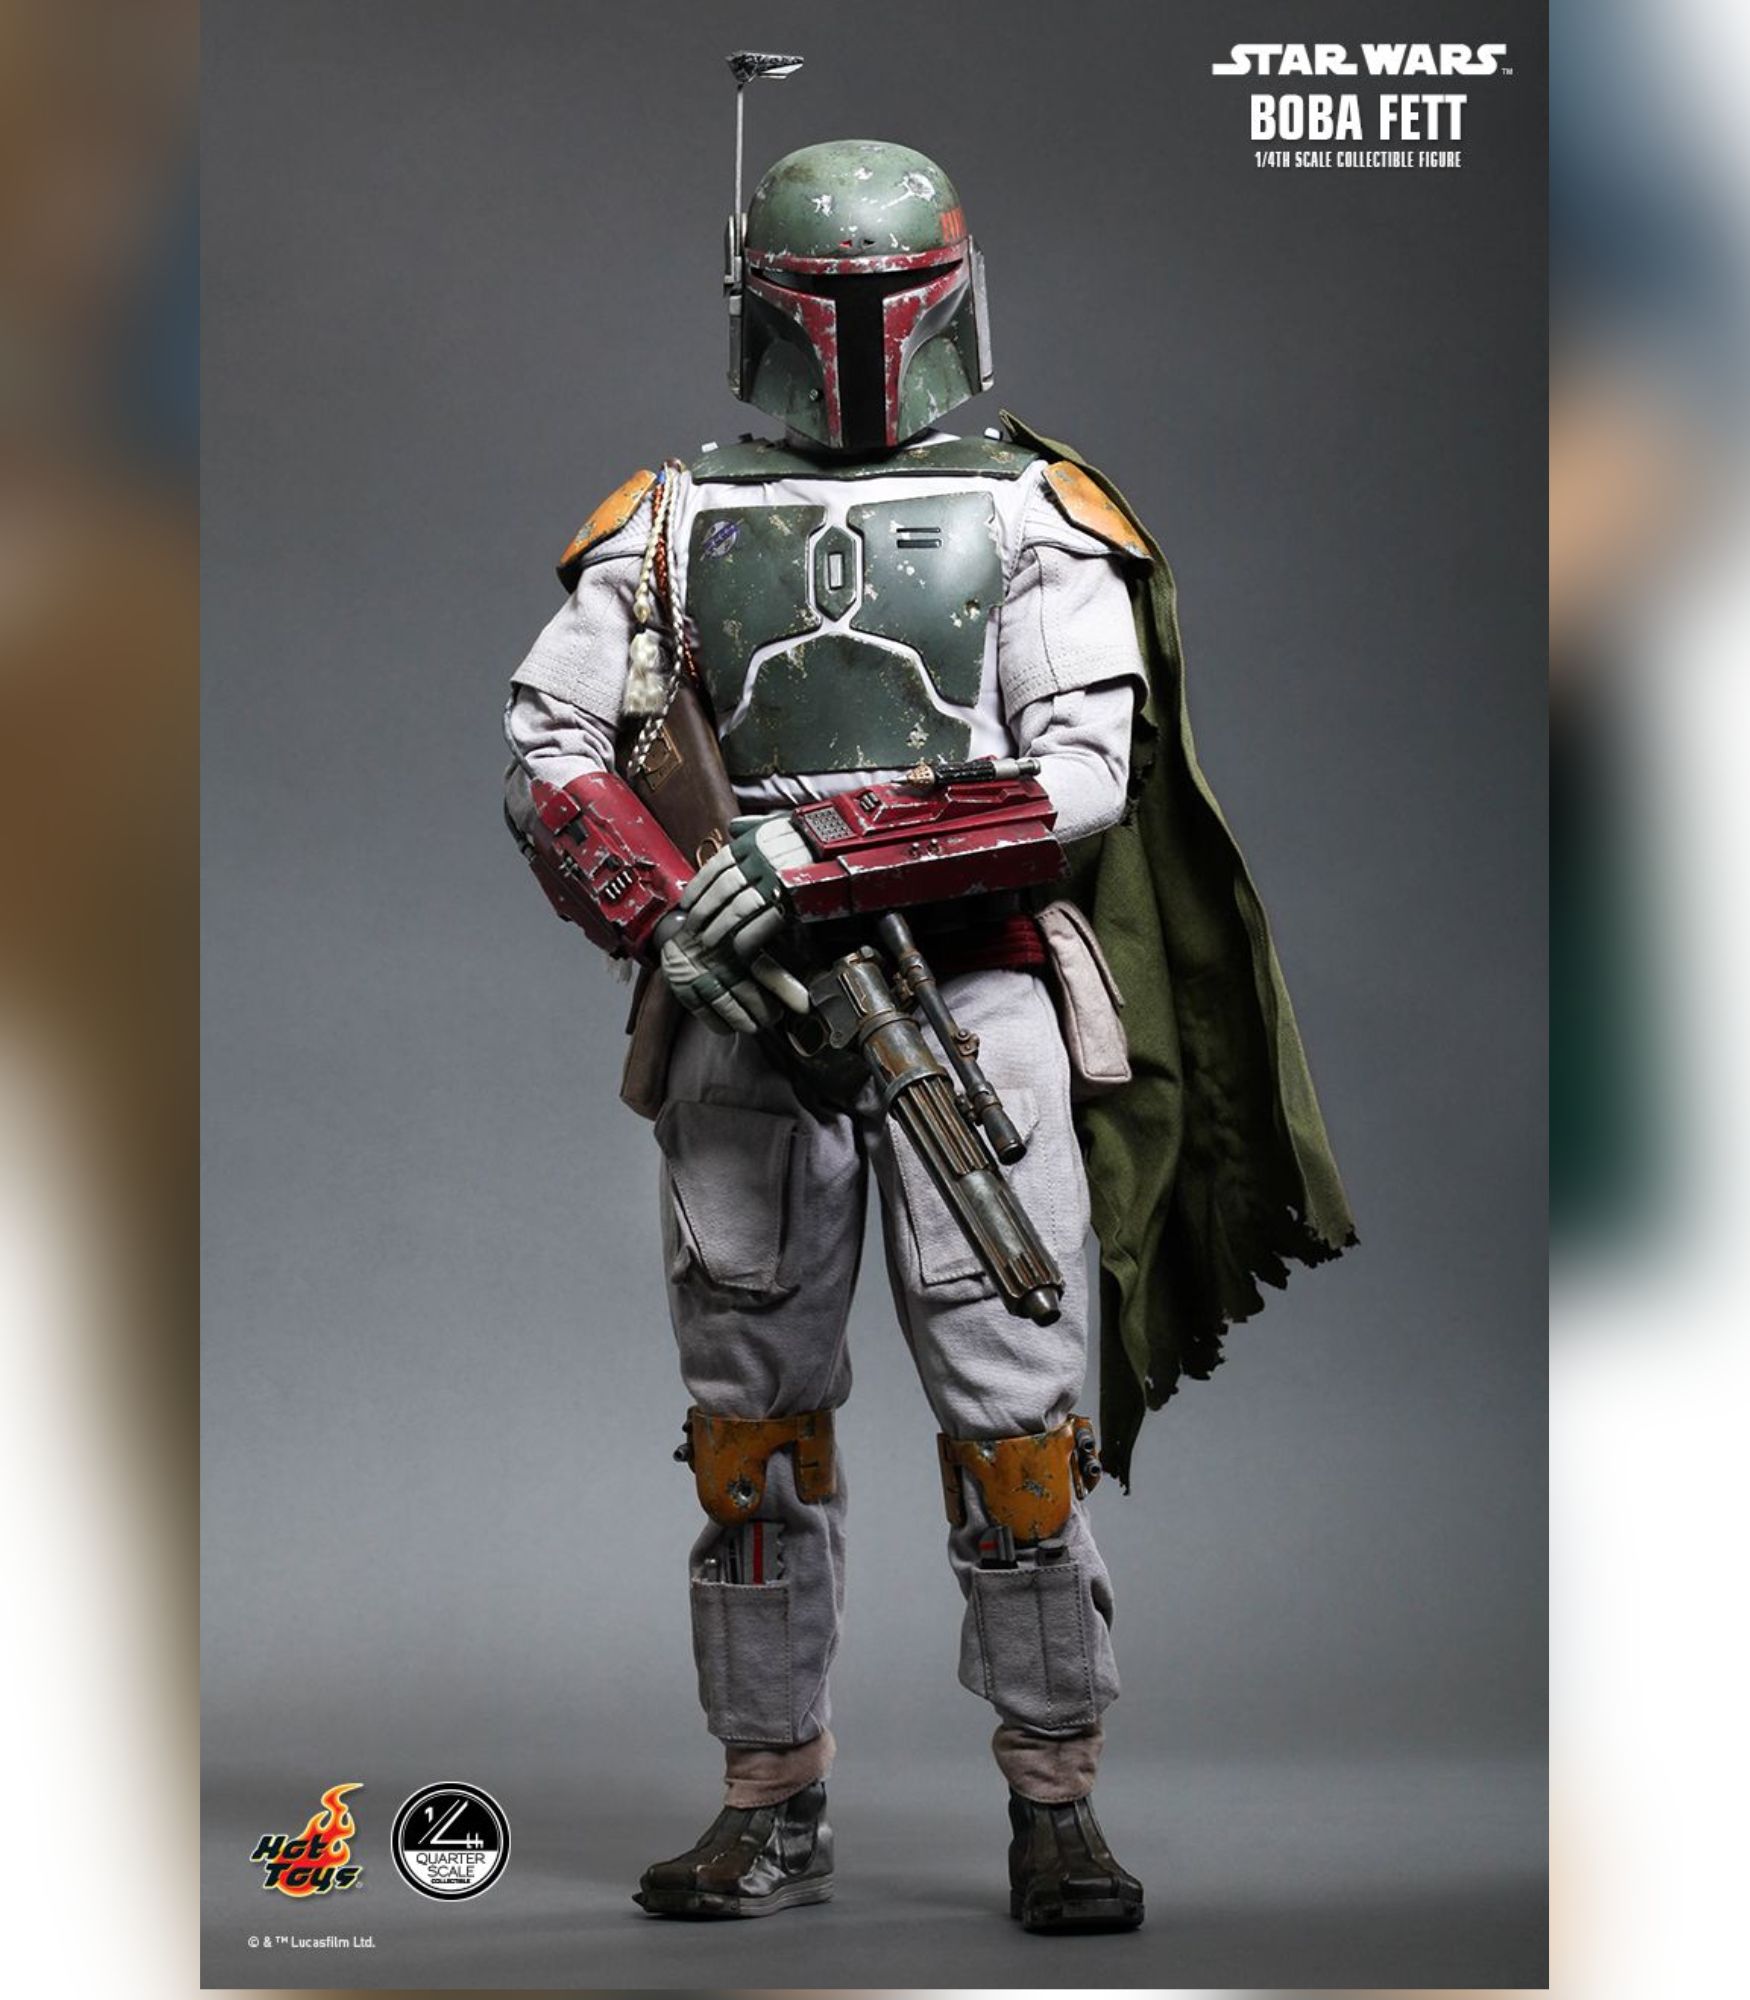 A fighter with a gun and a Boba Fett in Star Wars